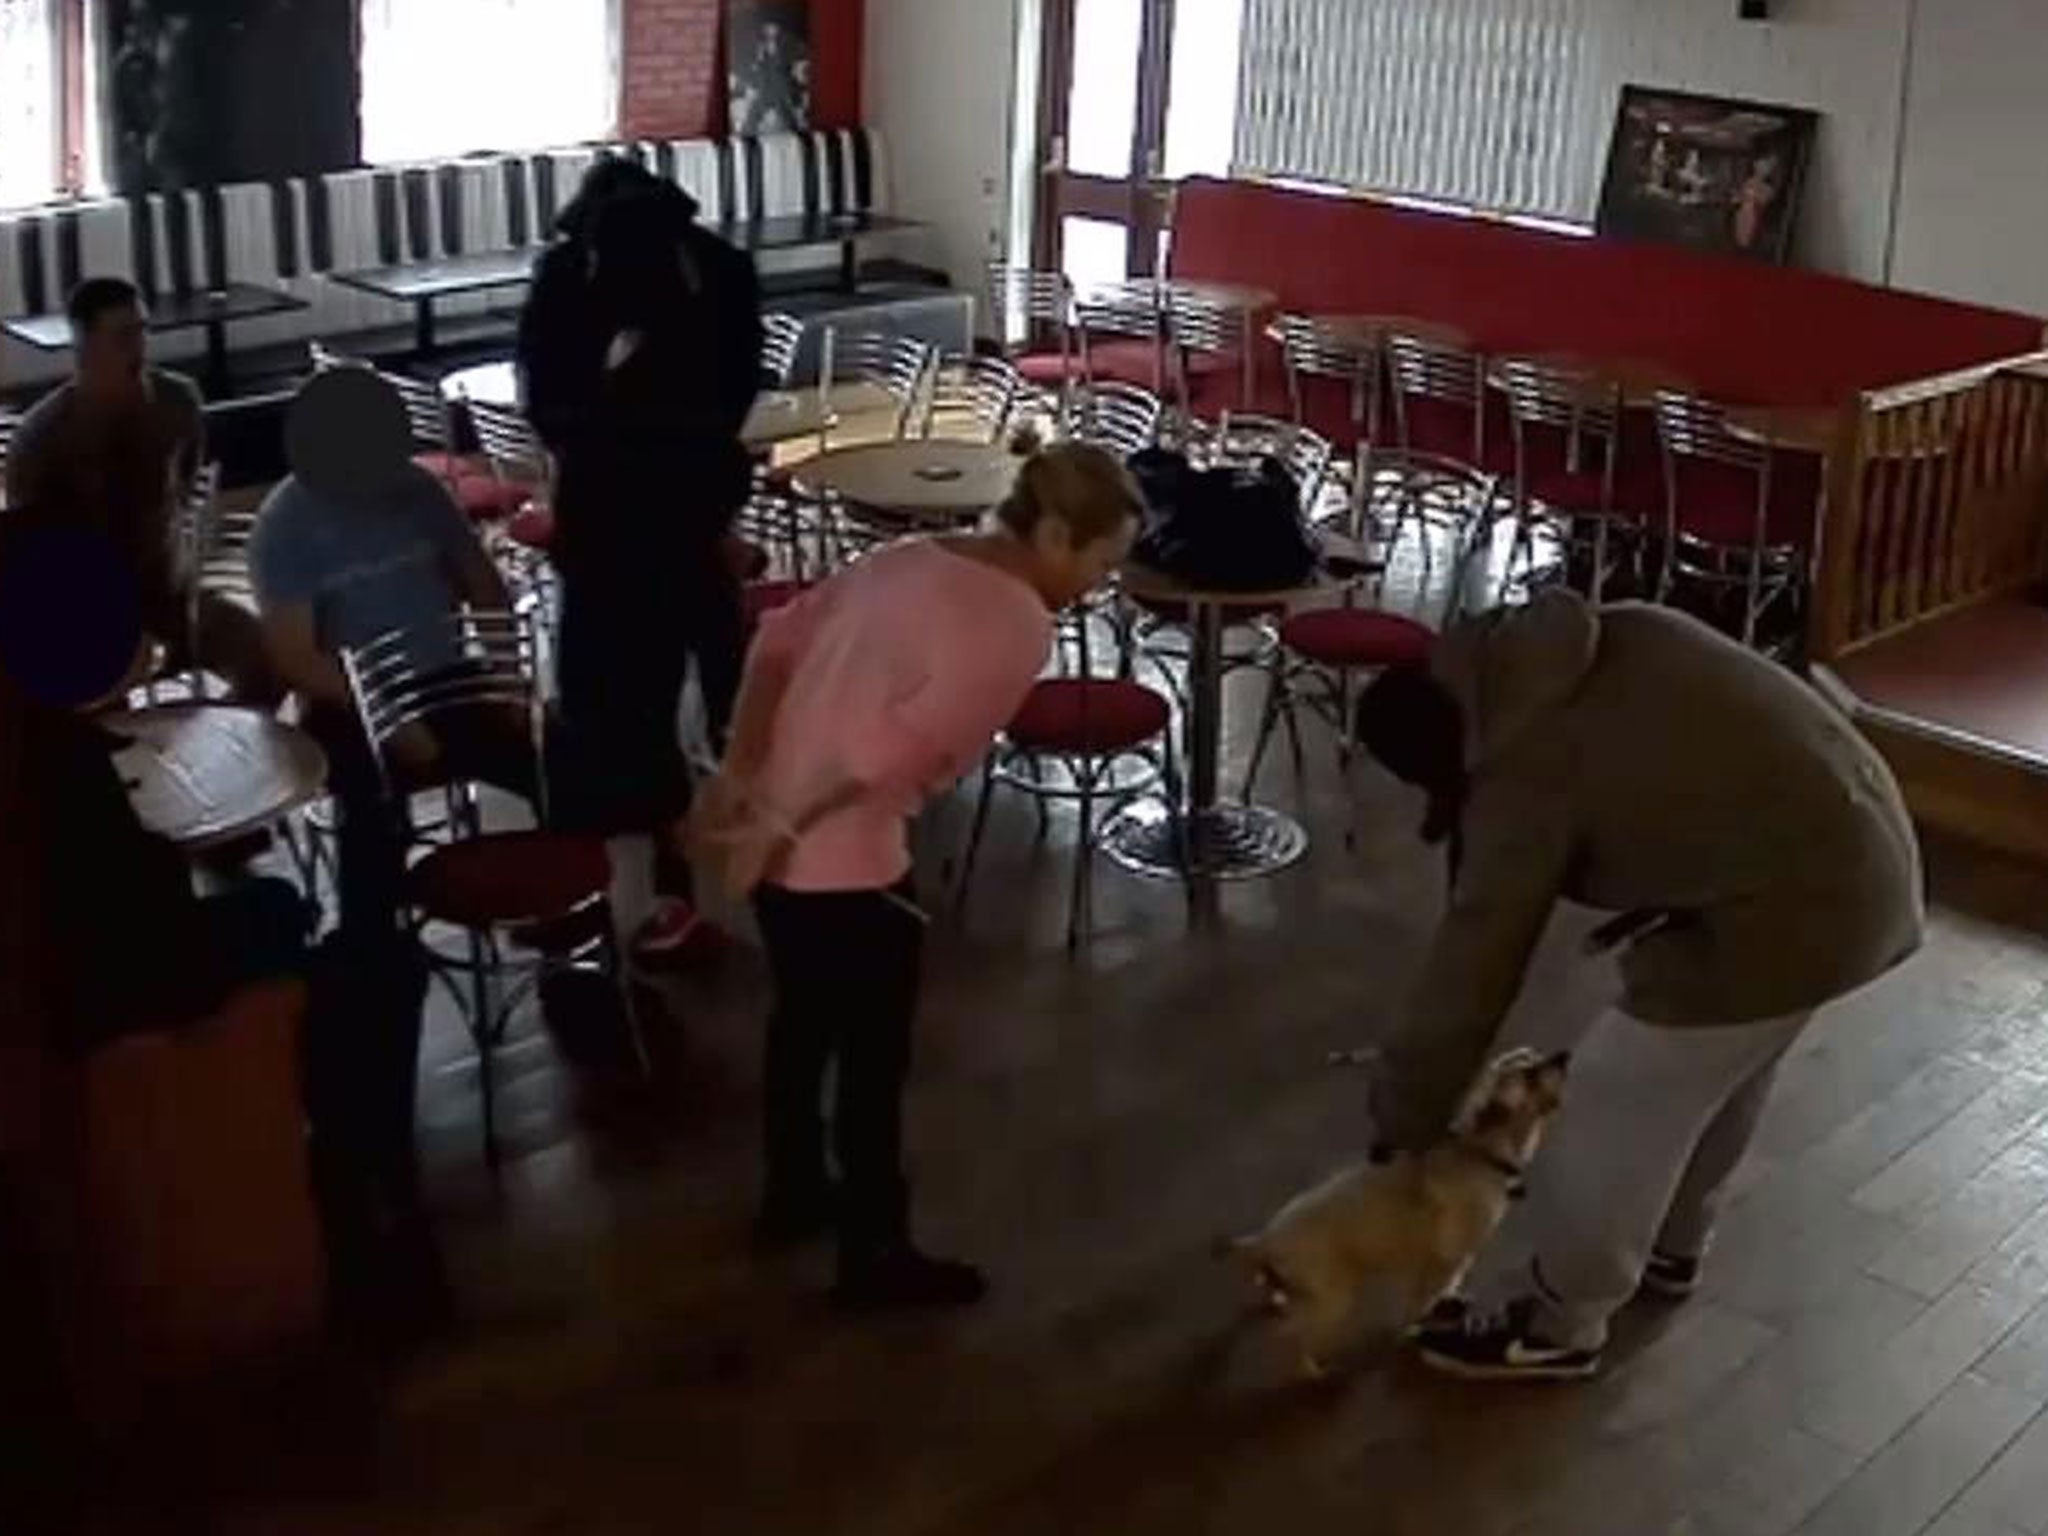 One of the robbers broke off to pet his hostage's dog at the Strawberry Duck pub in Manchester